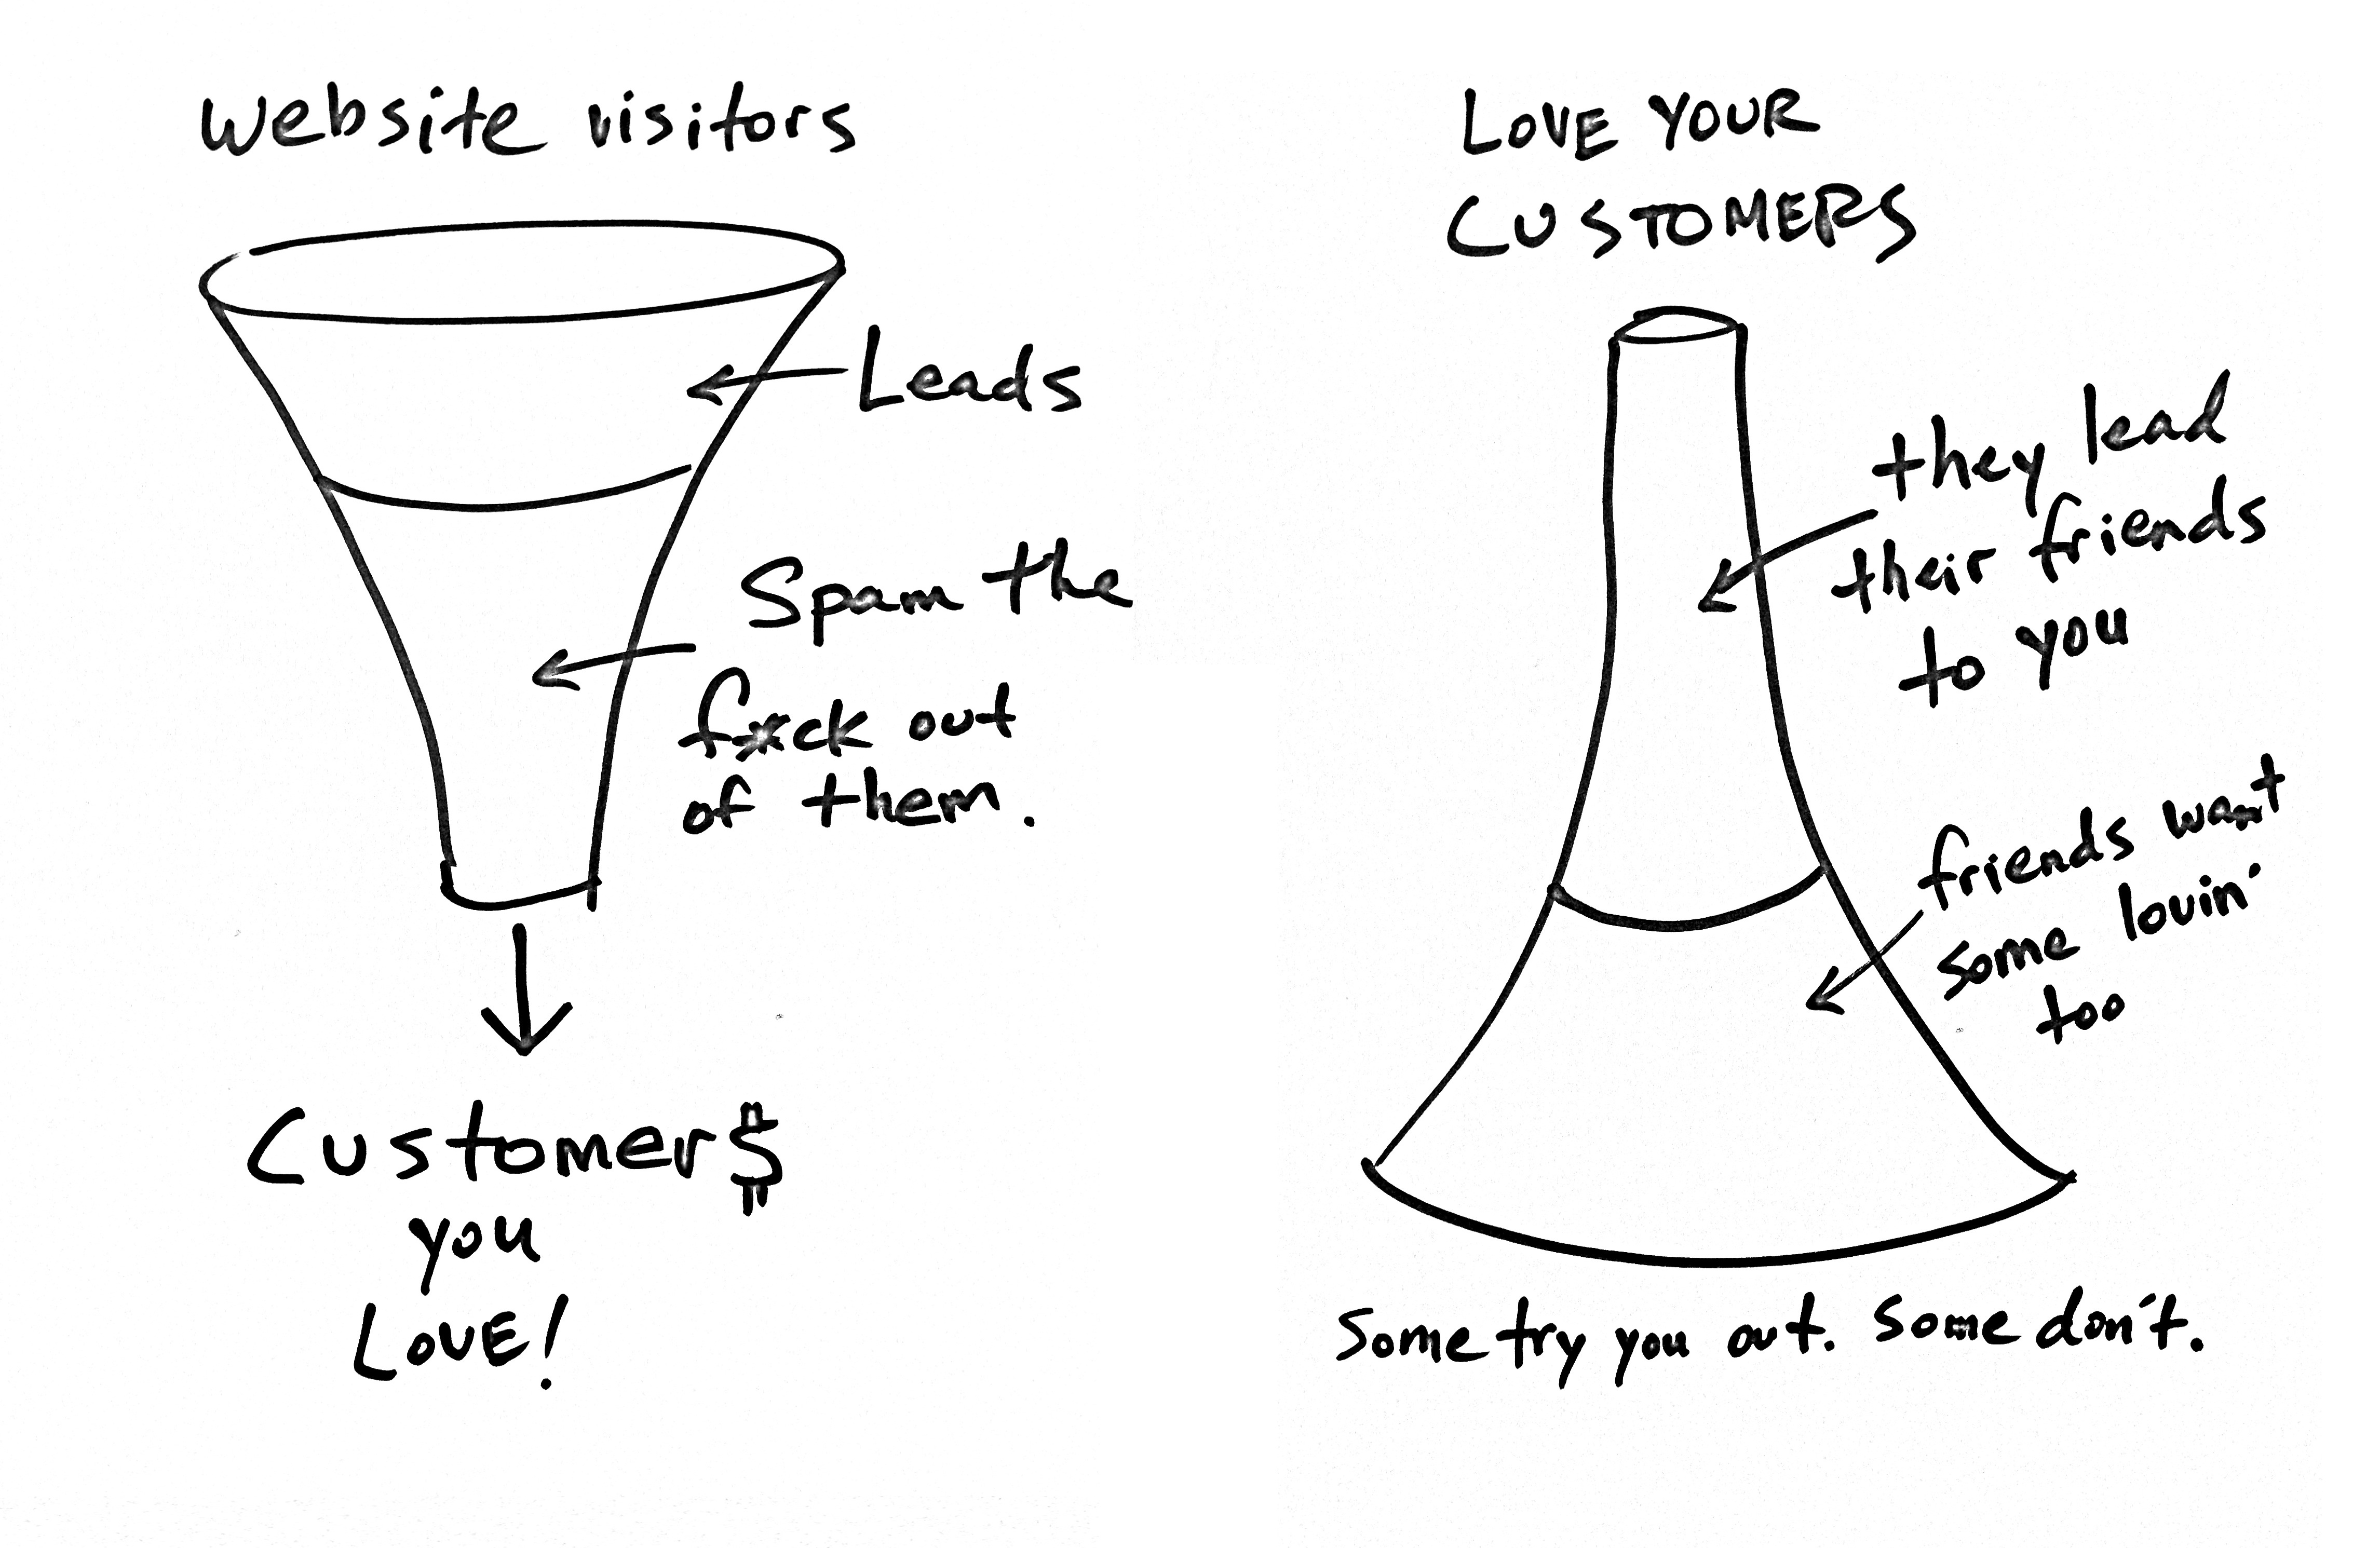 Illustration of the "upside down funnel" concept